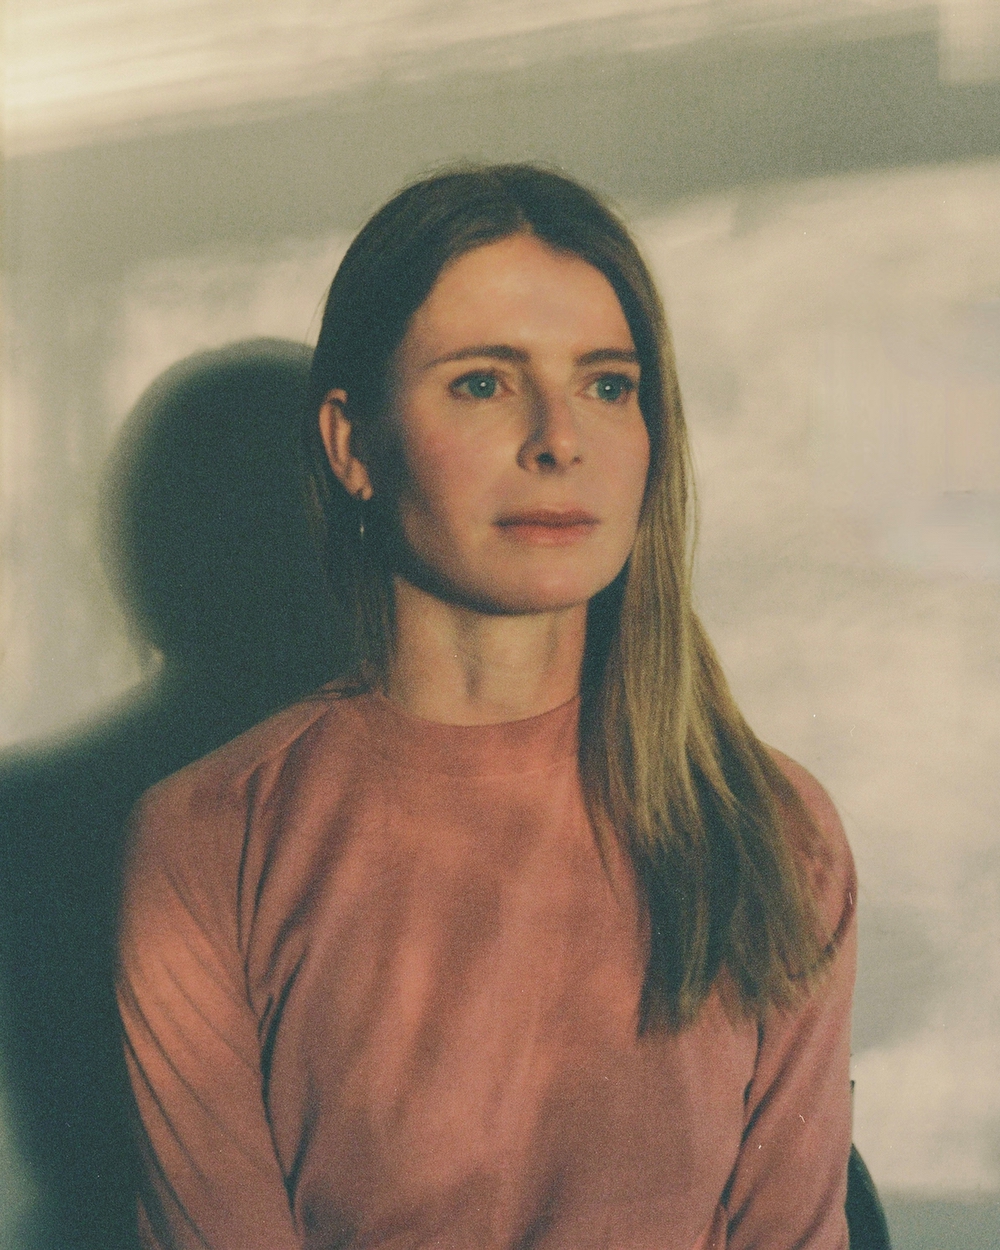 Emma Cline credit DV DeVincentis, cleared for world use (1)